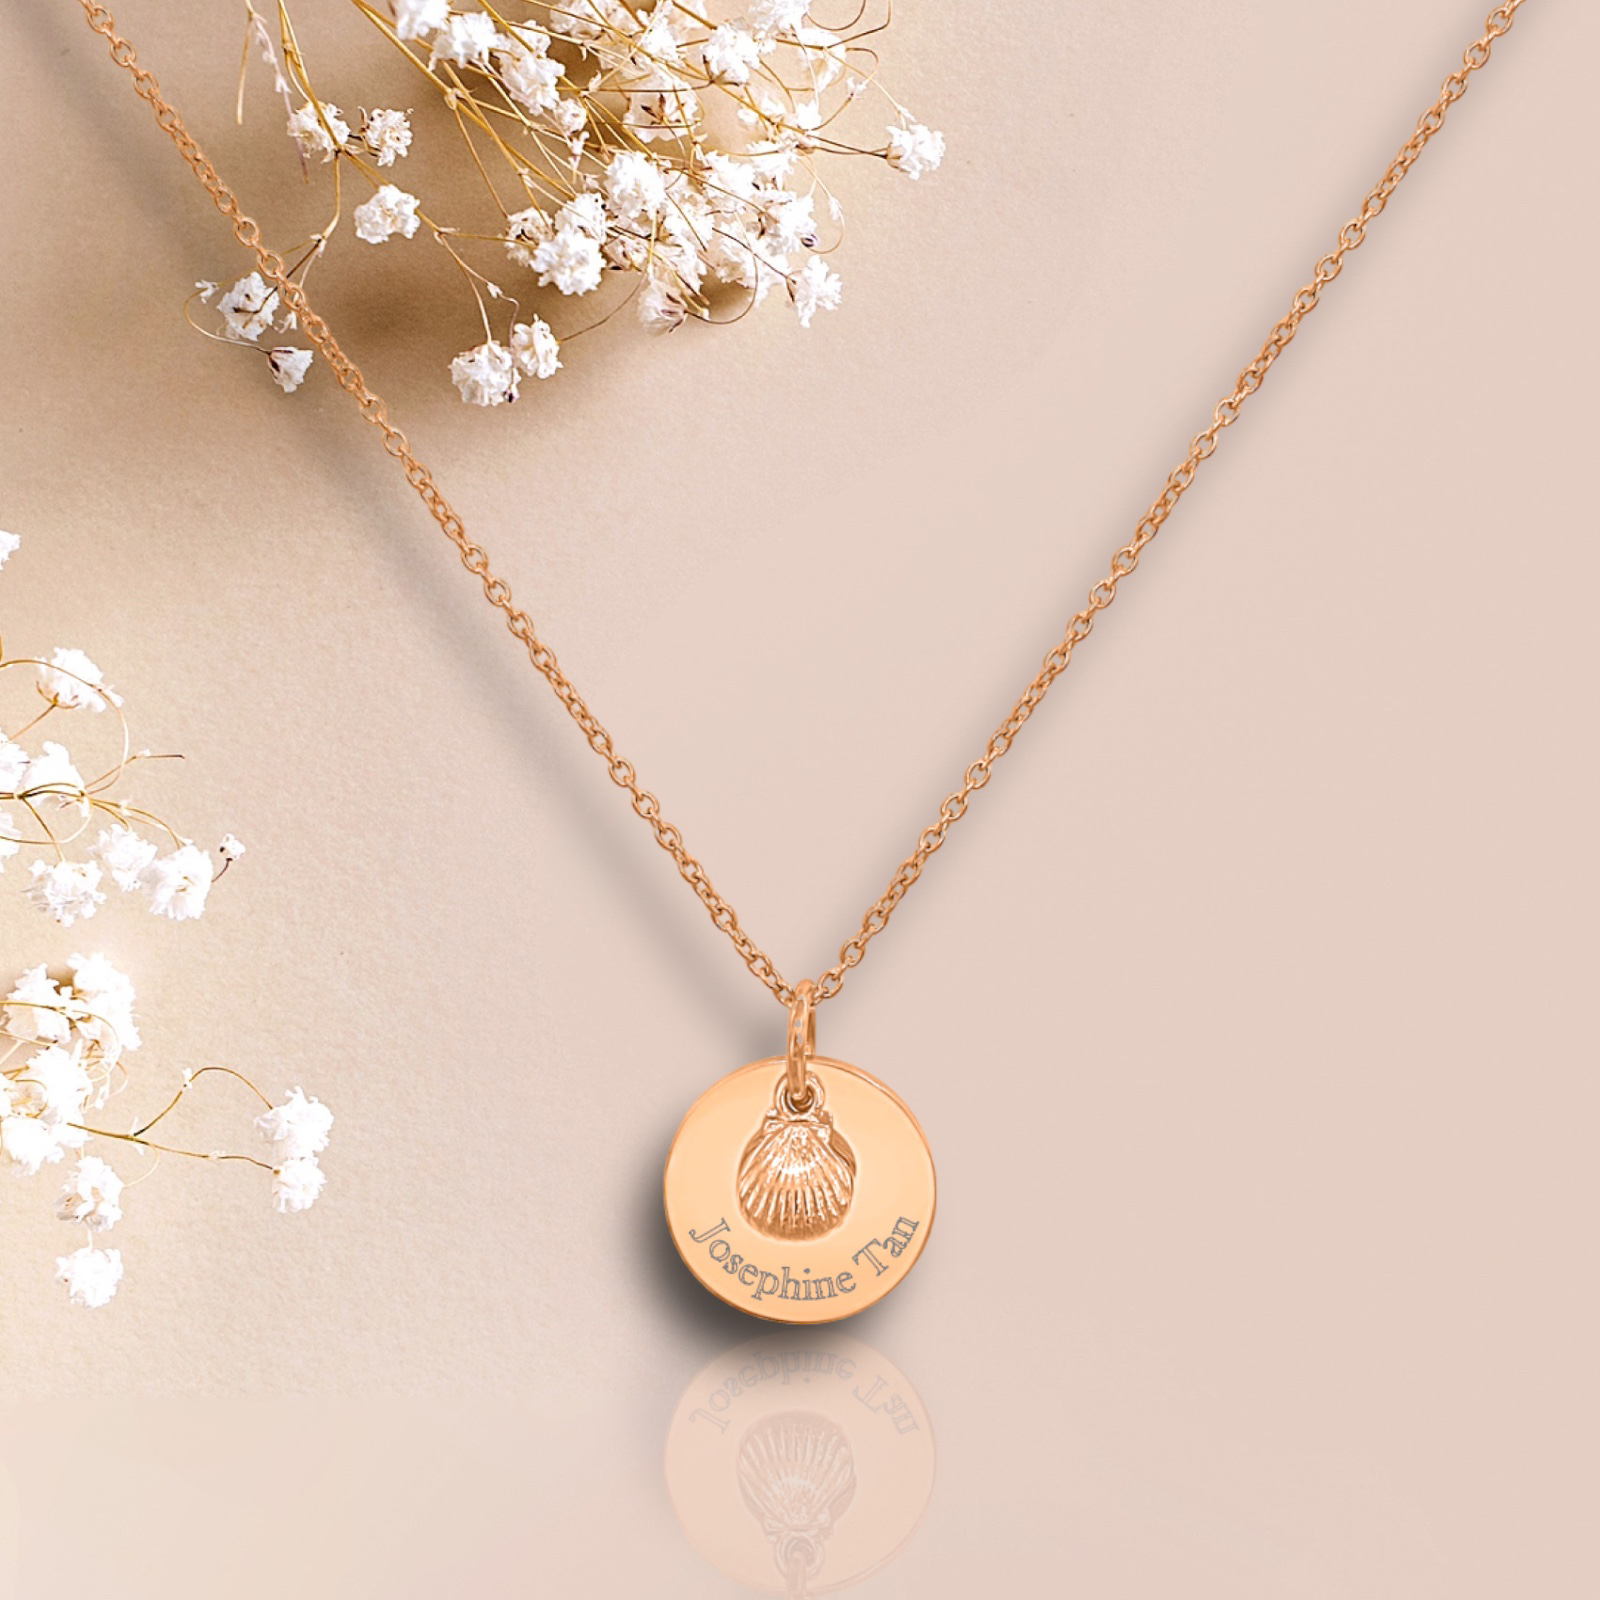 Seashell Charm Necklace - Rose Gold